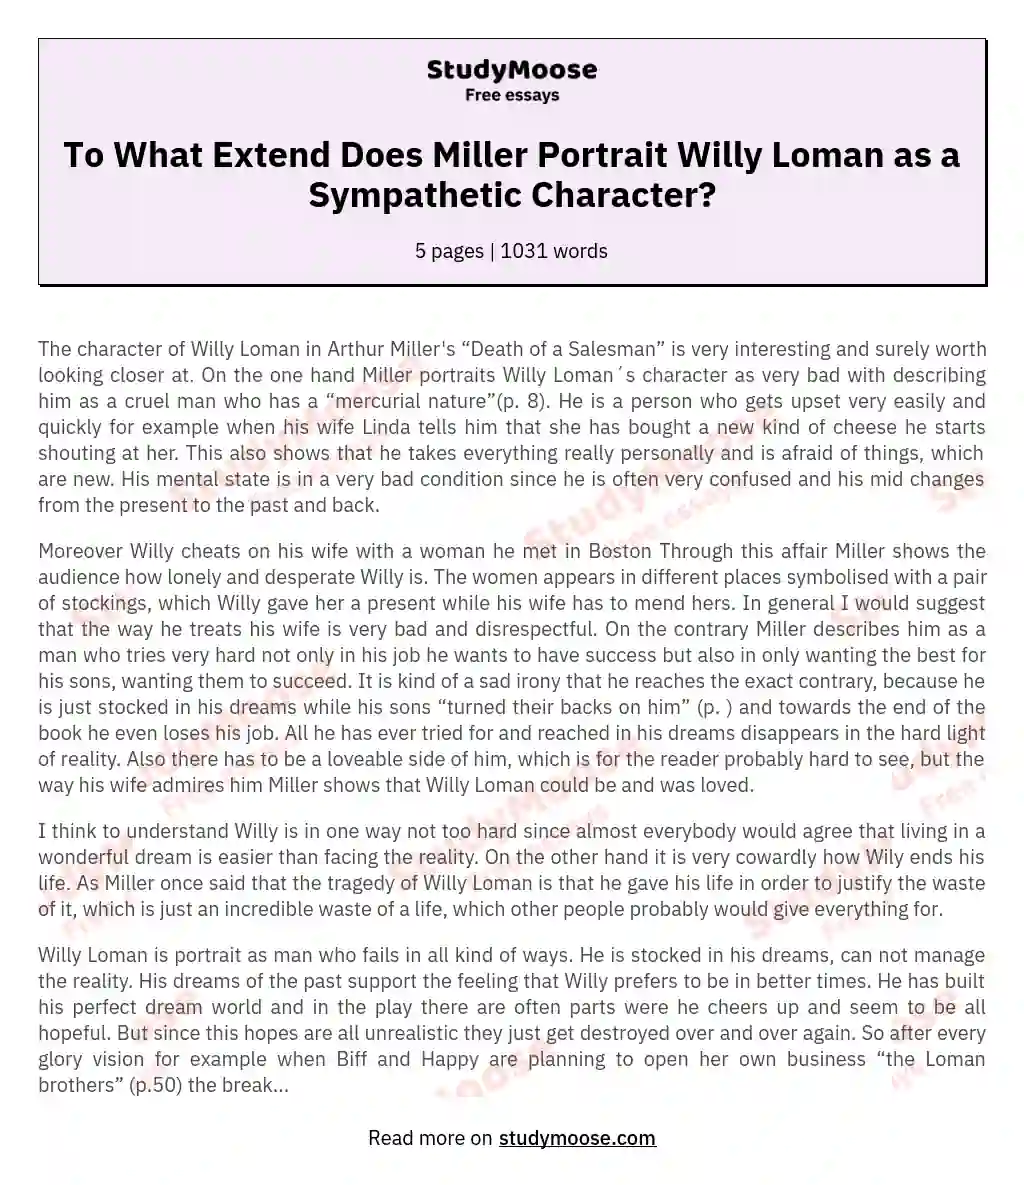 To What Extend Does Miller Portrait Willy Loman as a Sympathetic Character?